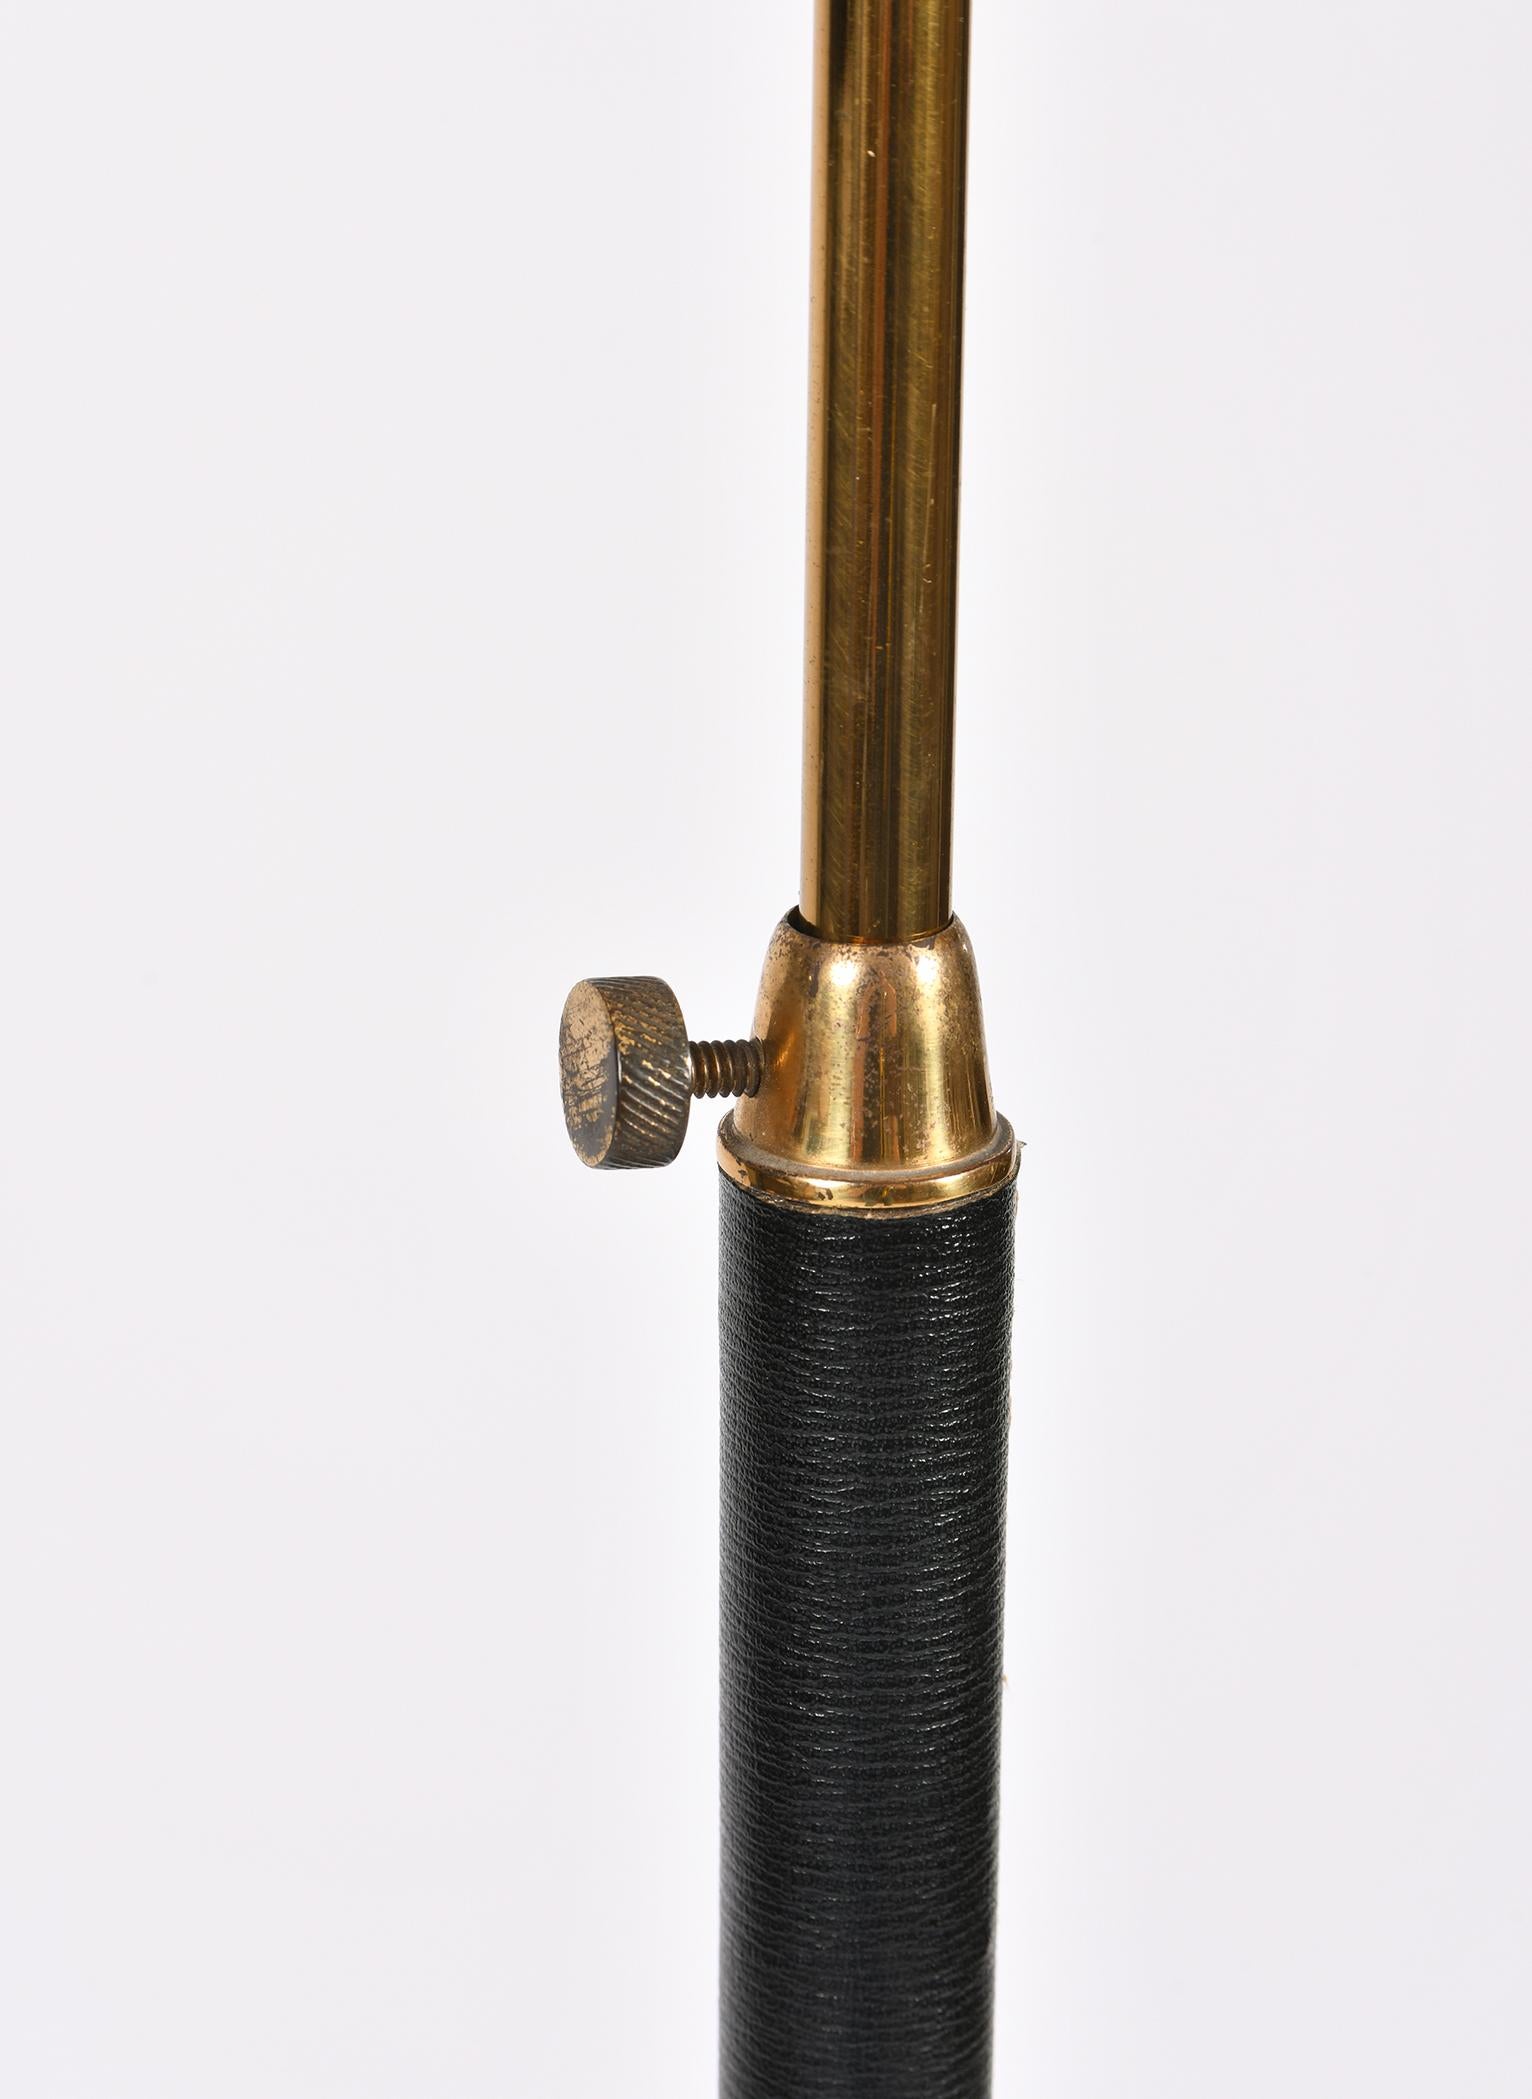 20th Century Black Leather and Brass Tripod Floor Lamp, in the Manner of Jacques Adnet